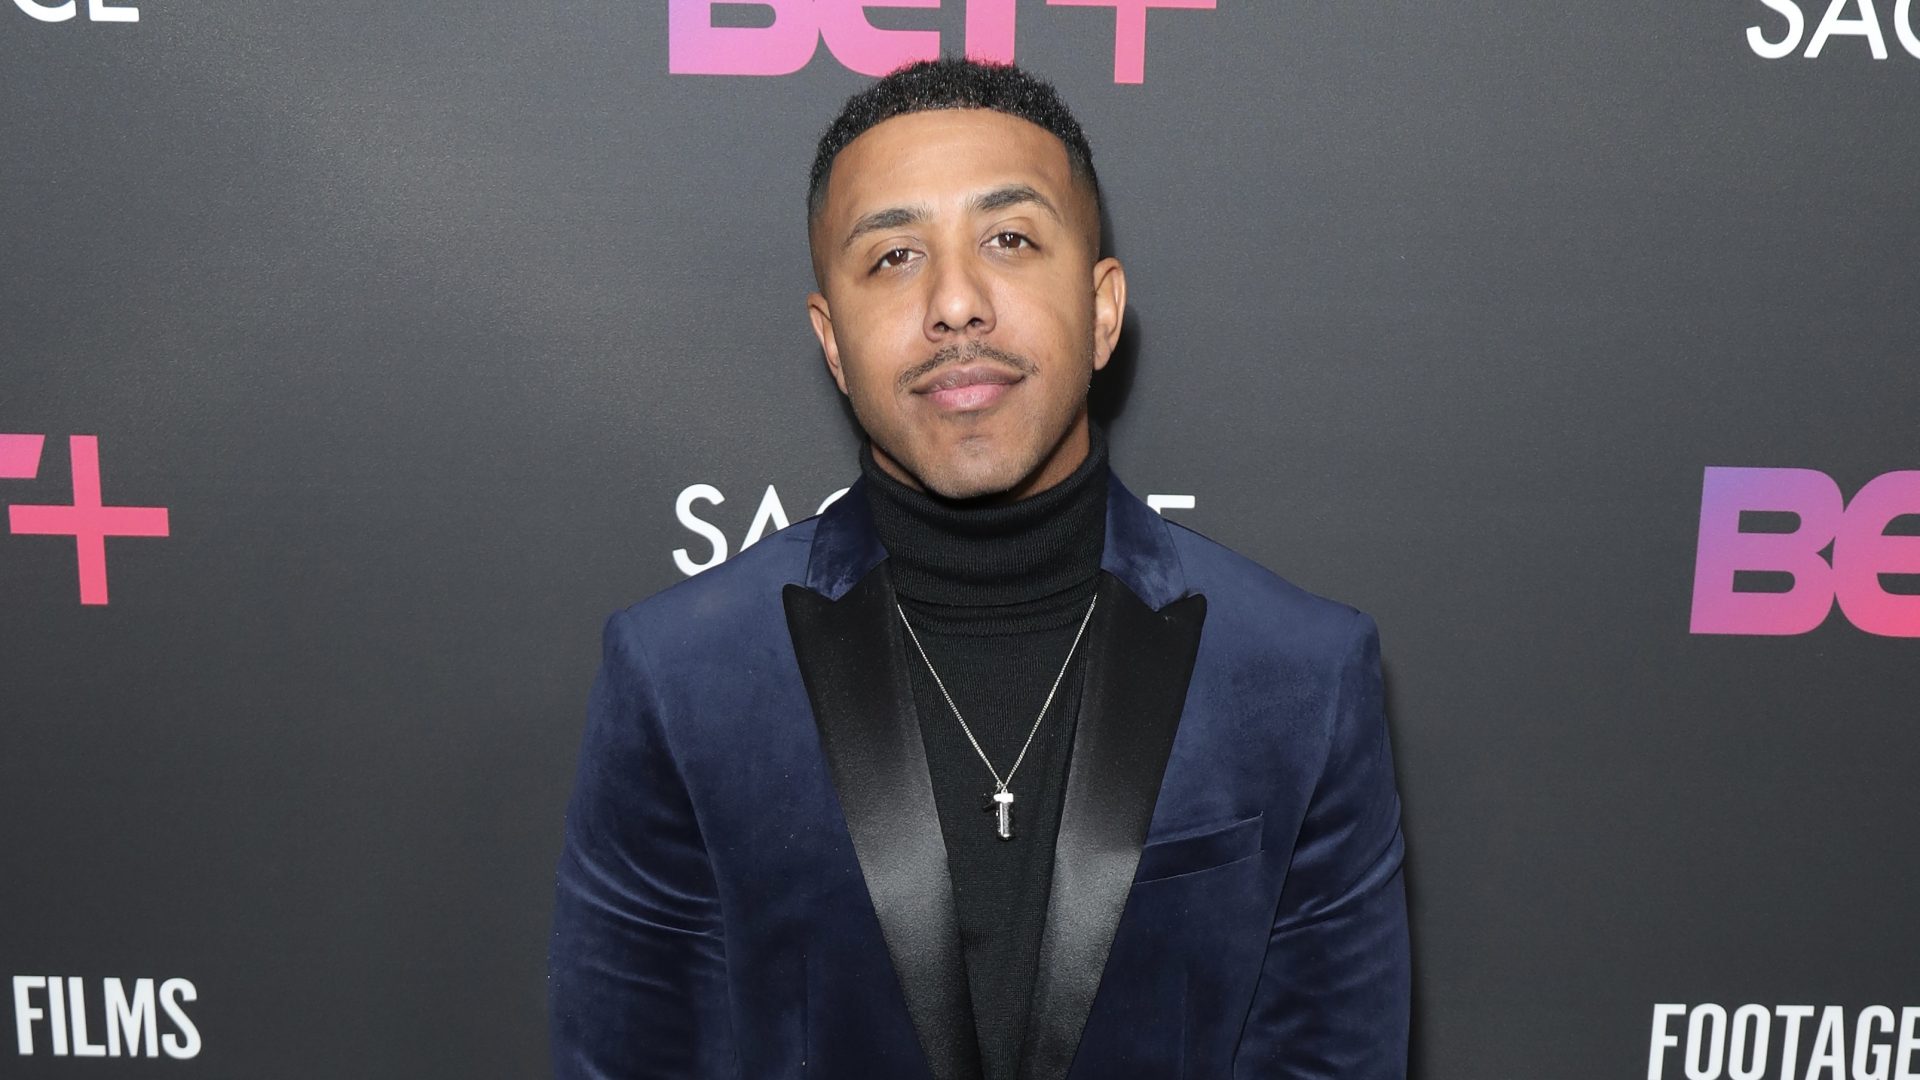 Marques Houston Responds To Backlash Regarding The Almost 20-Year Age Gap Between Him & His Wife (Video)